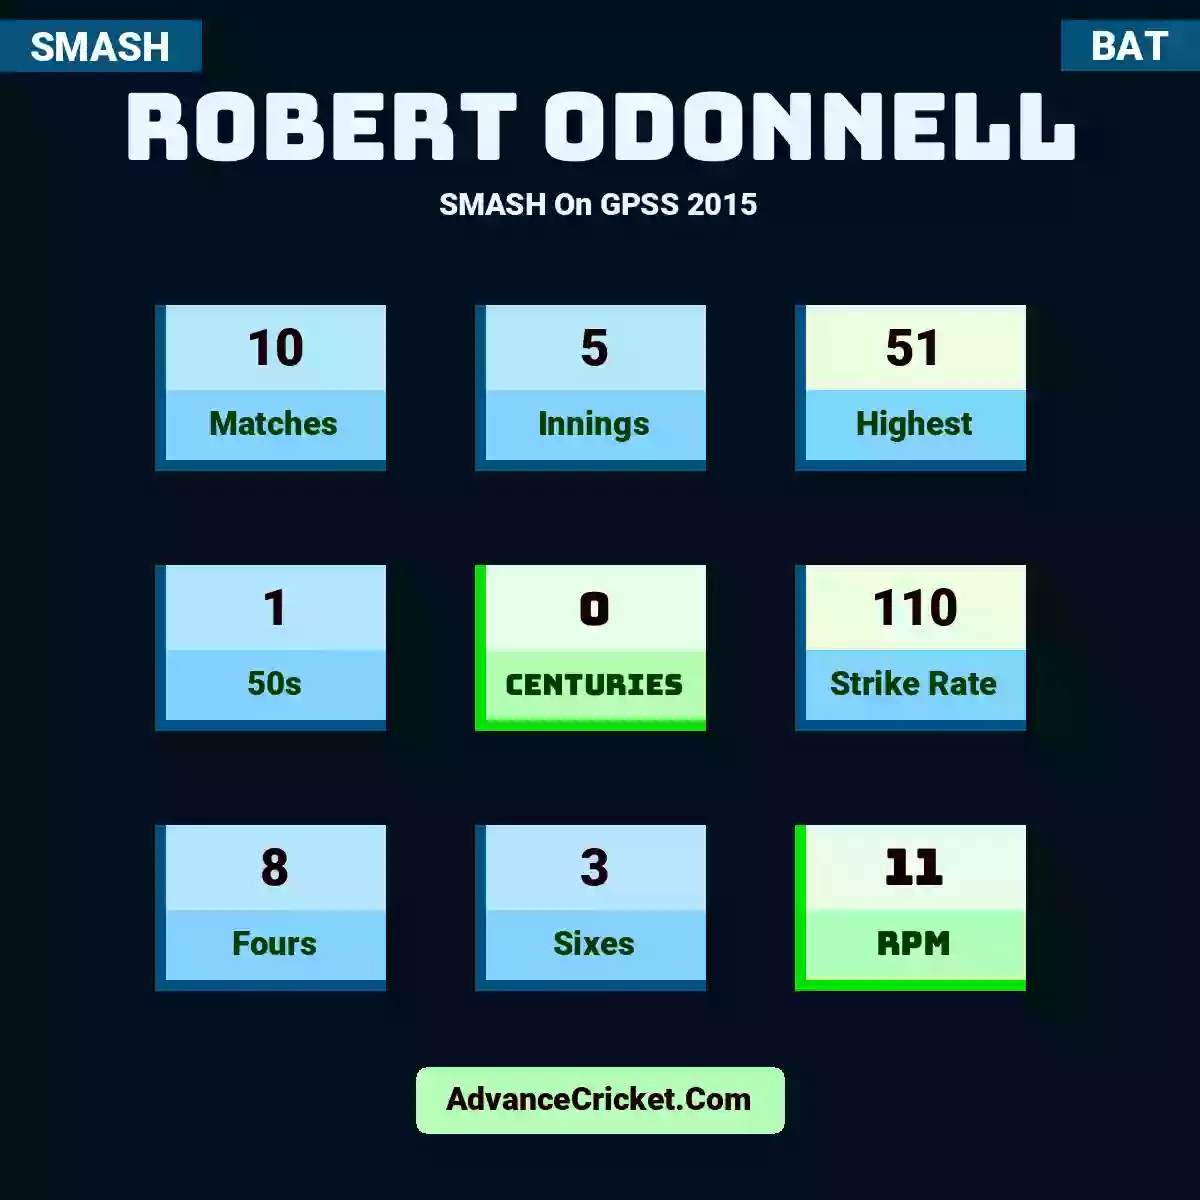 Robert ODonnell SMASH  On GPSS 2015, Robert ODonnell played 10 matches, scored 51 runs as highest, 1 half-centuries, and 0 centuries, with a strike rate of 110. R.ODonnell hit 8 fours and 3 sixes, with an RPM of 11.